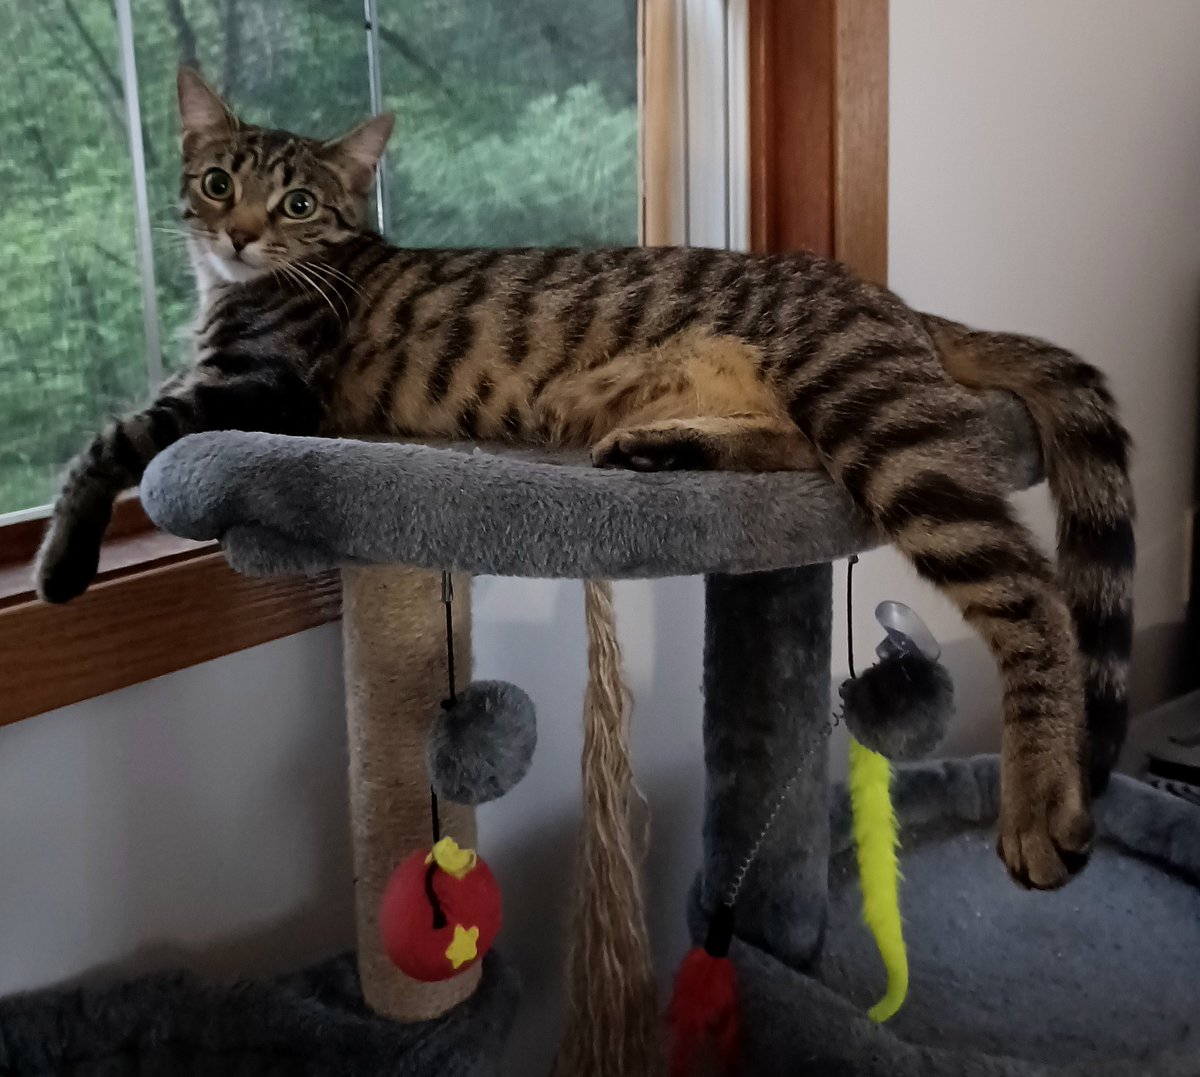 I'm stretching out to try and beat the heat on this #TabbyTuesday. Is it unseasonably hot where you are, too? #CatsOfX #CatsOfTwix #TabbyCat